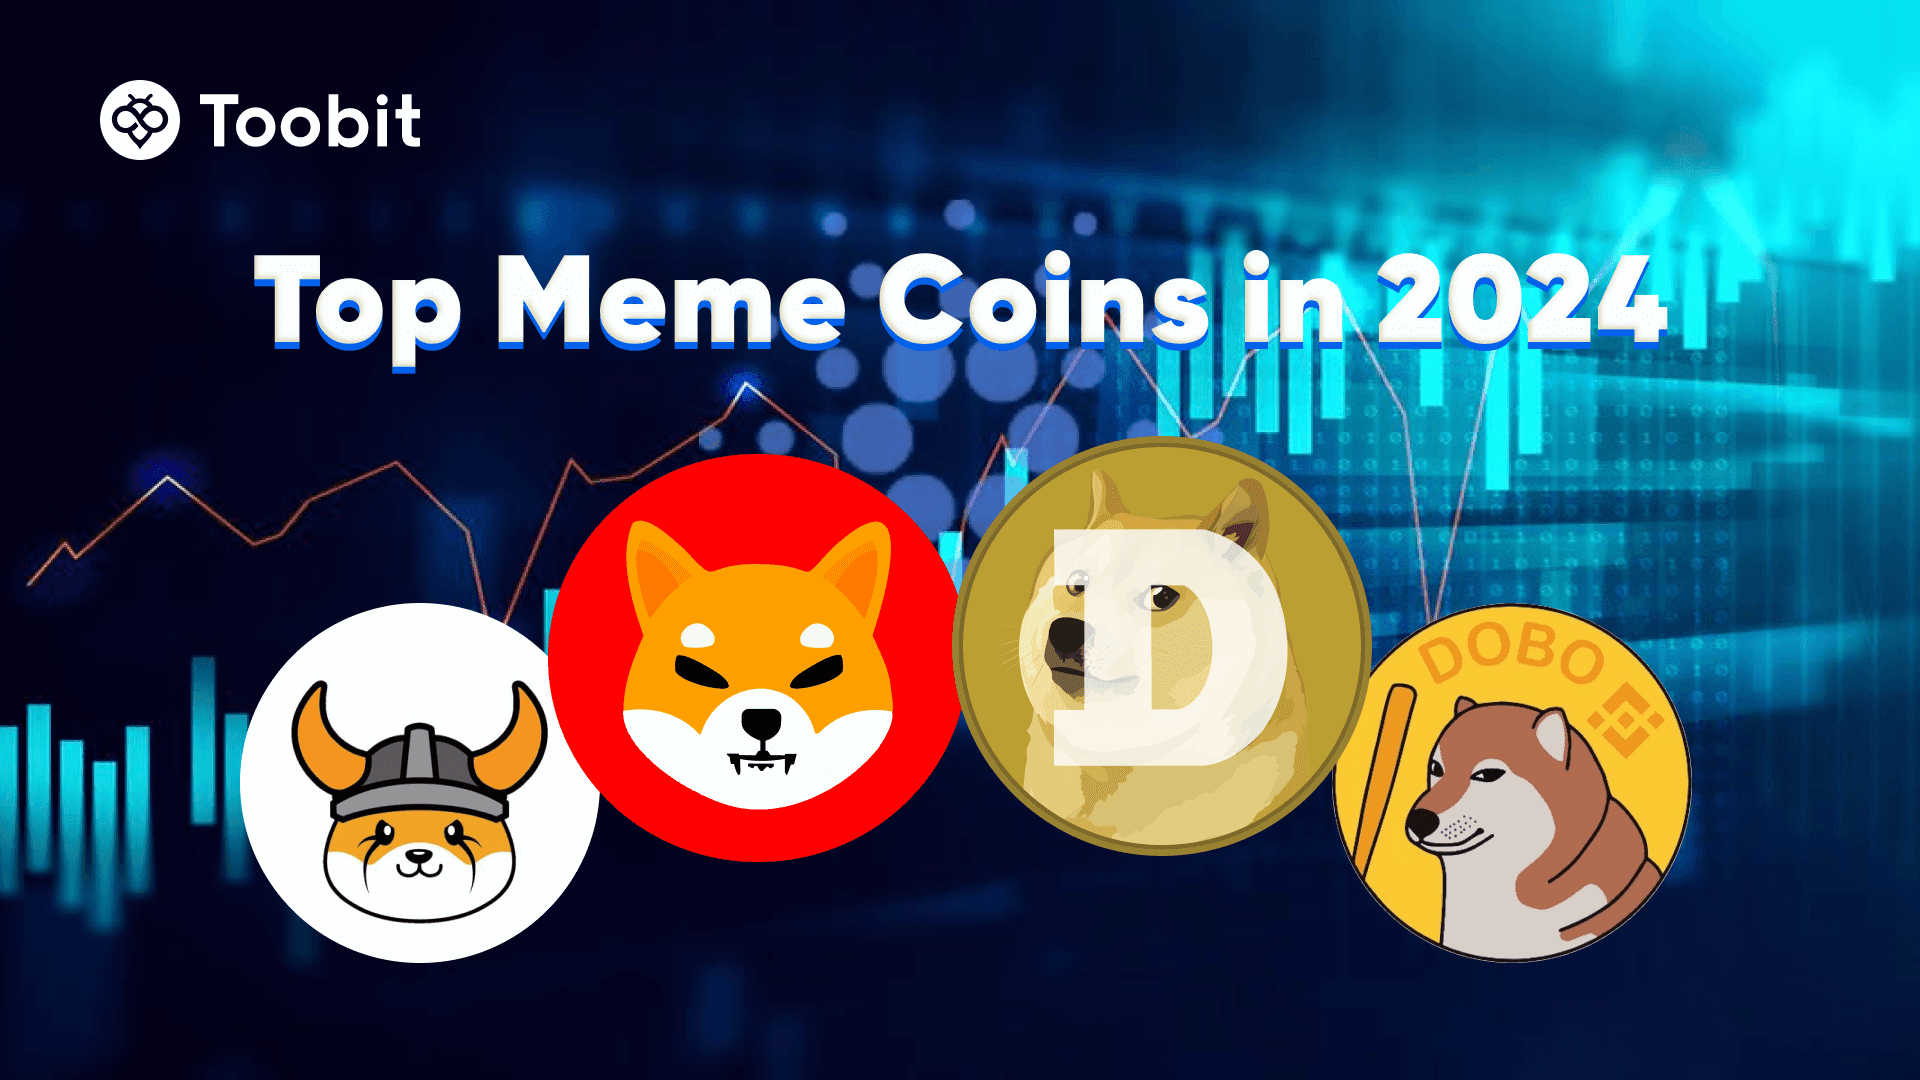 Top Meme Coins to Watch in 2024